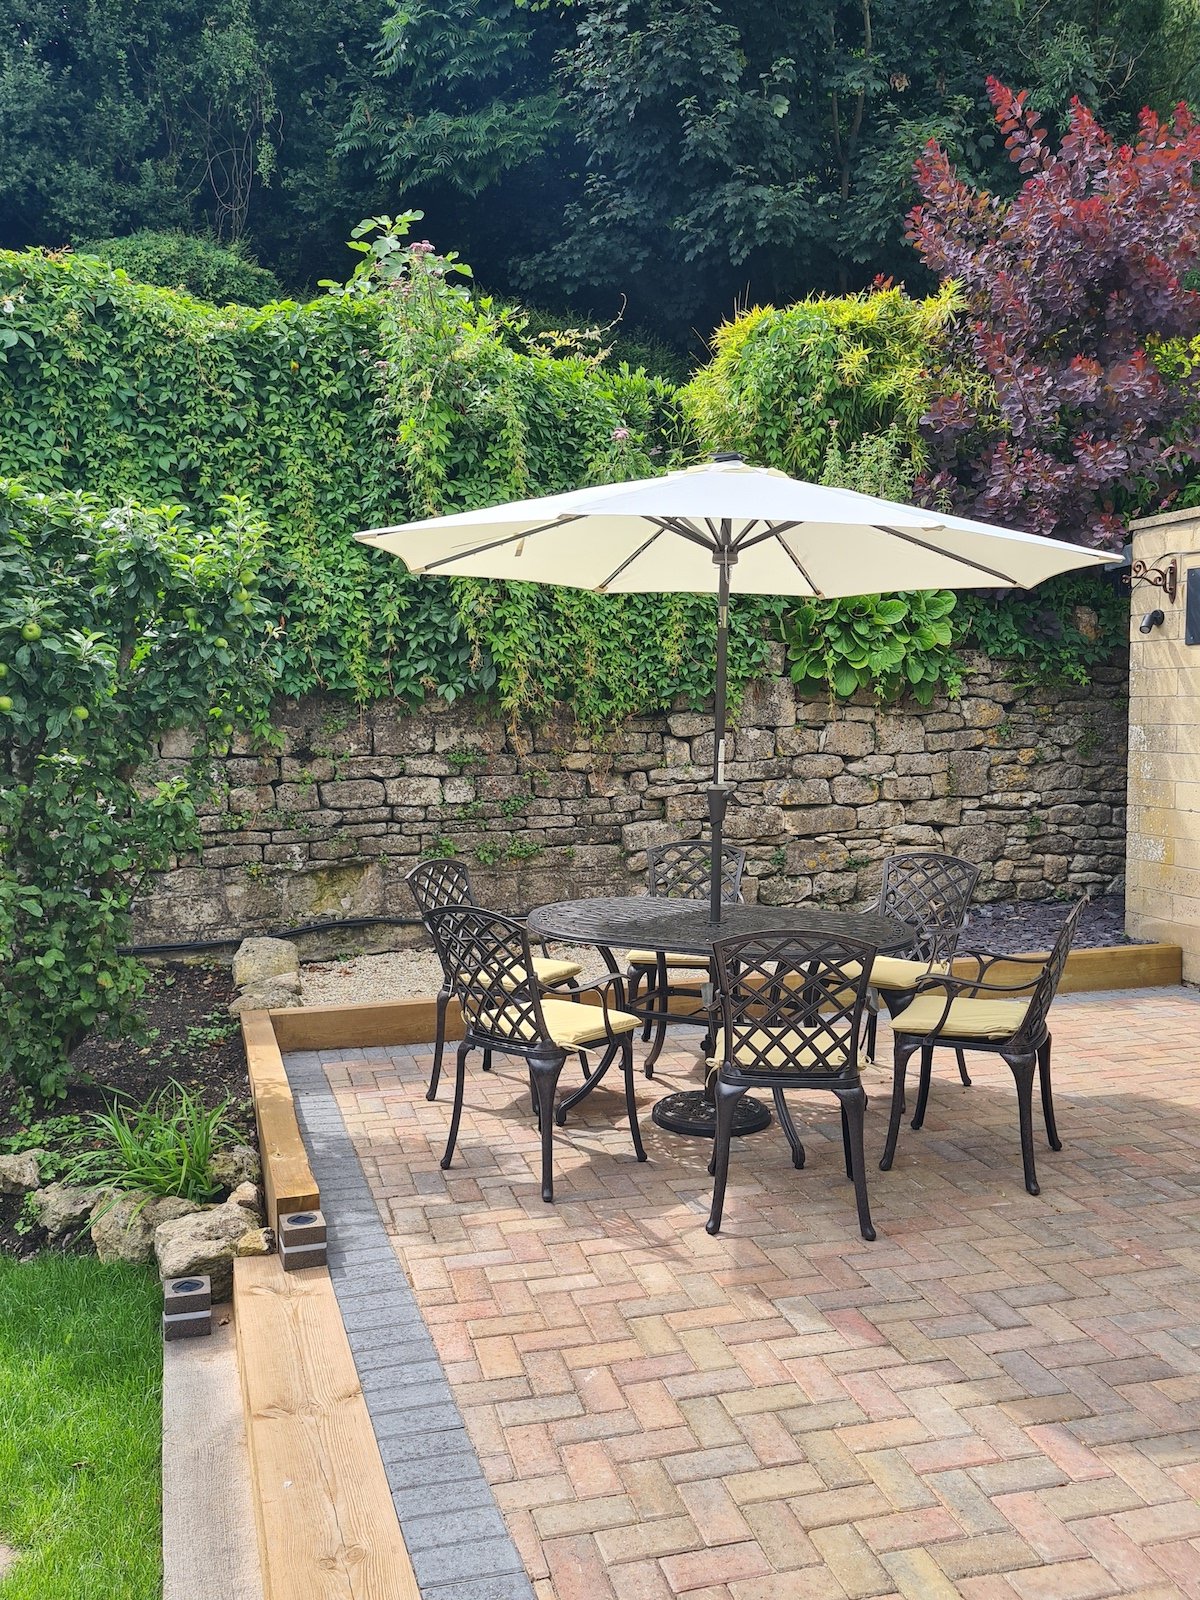 Why purchase garden furniture cushions?